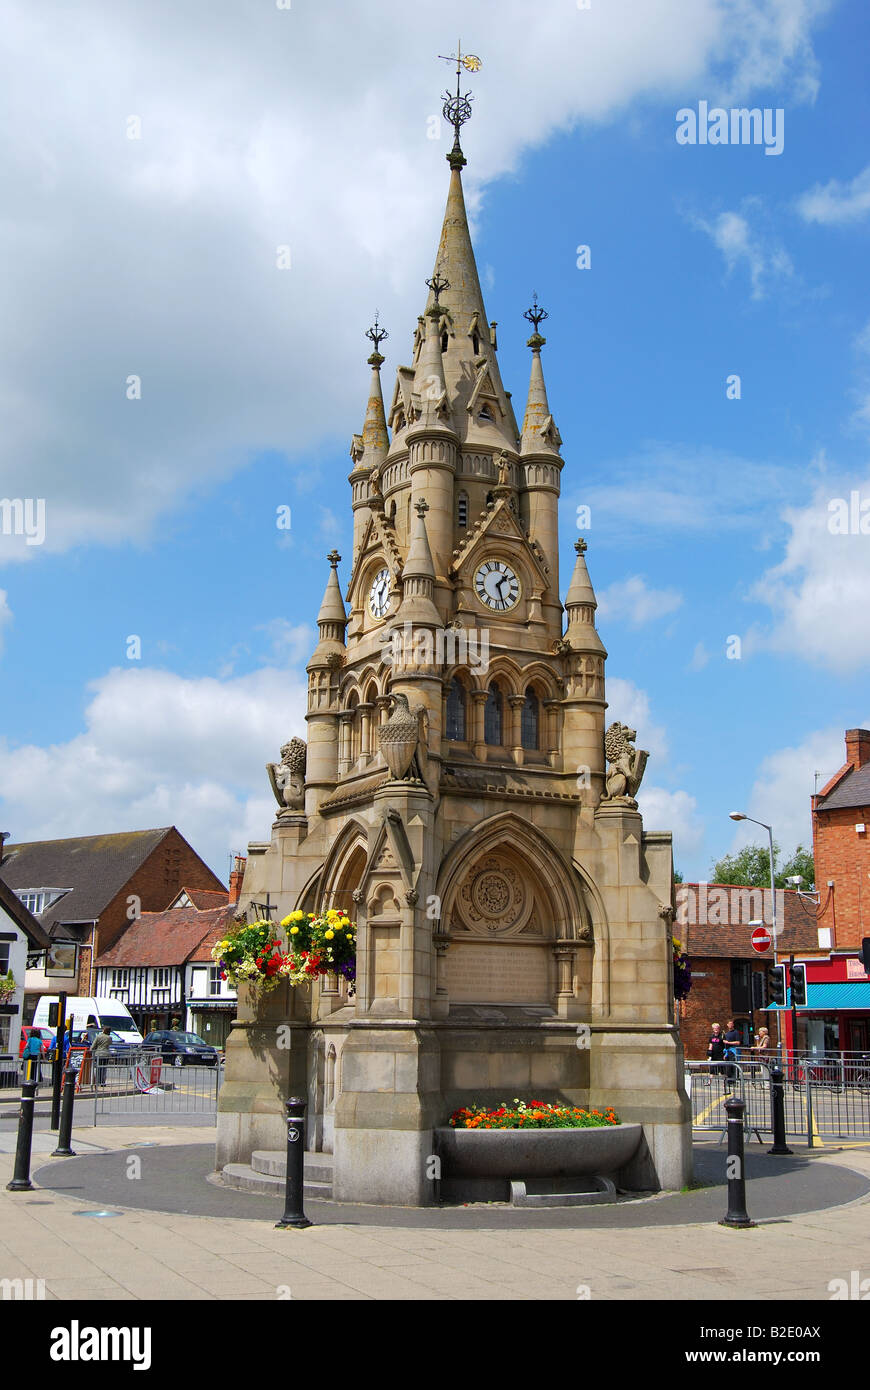 Victorian American Fountain in Market Square, Rother Street, Stratford-Upon-Avon, Warwickshire, England, United Kingdom Stock Photo